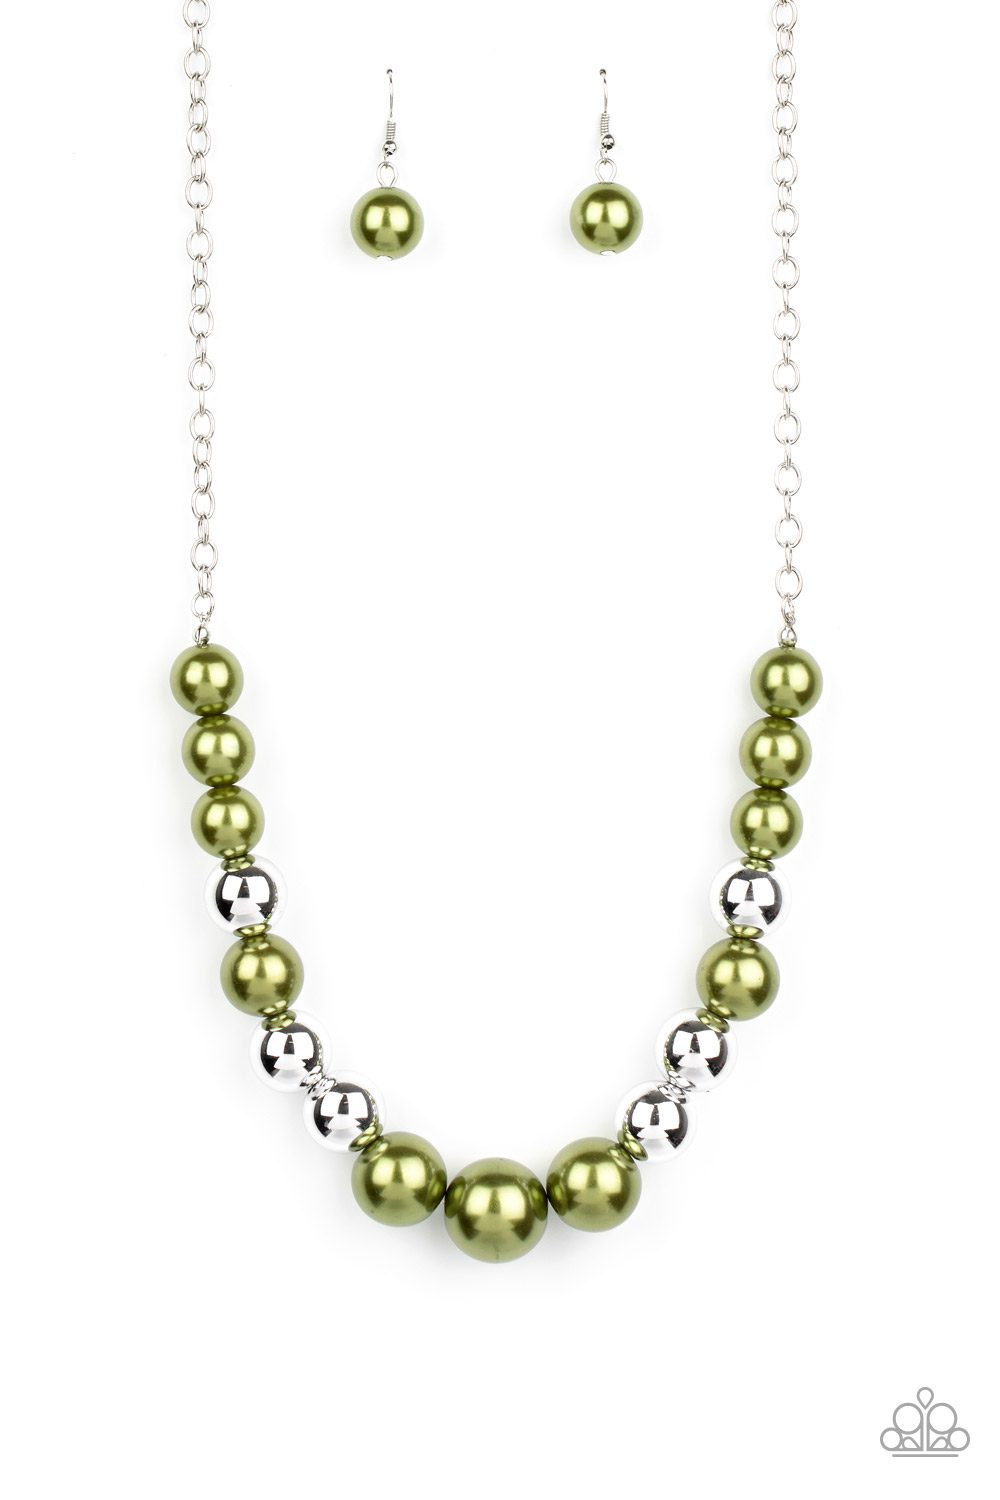 Necklace - Take Note - Green